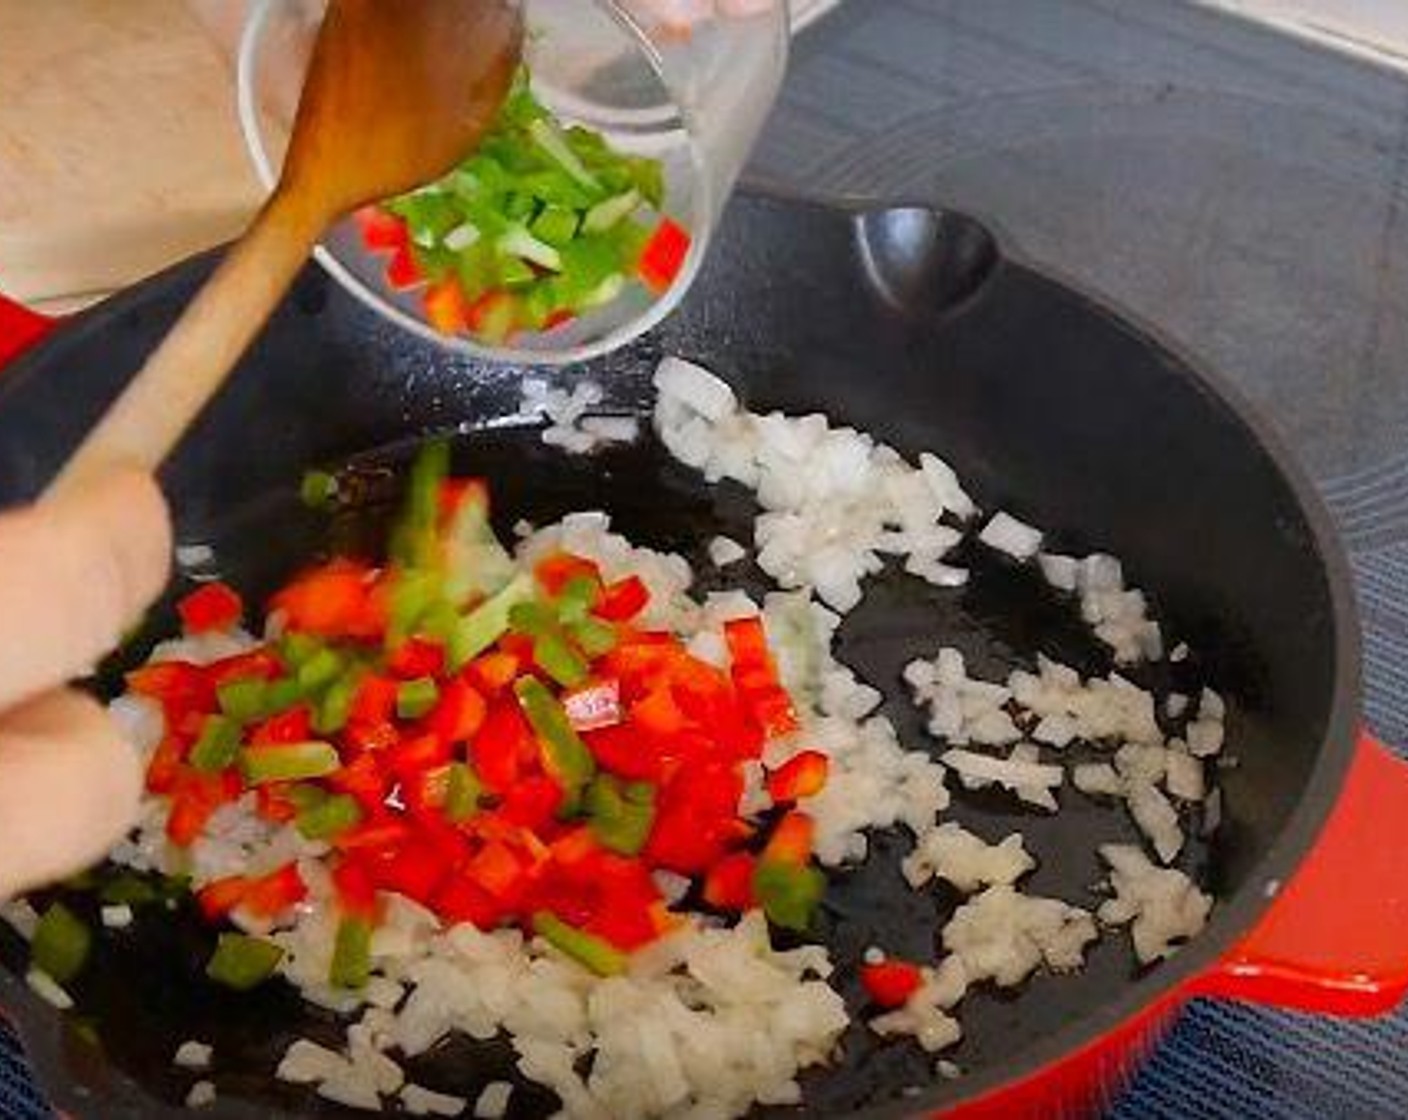 step 2 To a hot skillet add Vegetable Oil (3 Tbsp) add White Onion (1), Bell Pepper (1), and Garlic (2 cloves) and leave to cook until they start to soften.